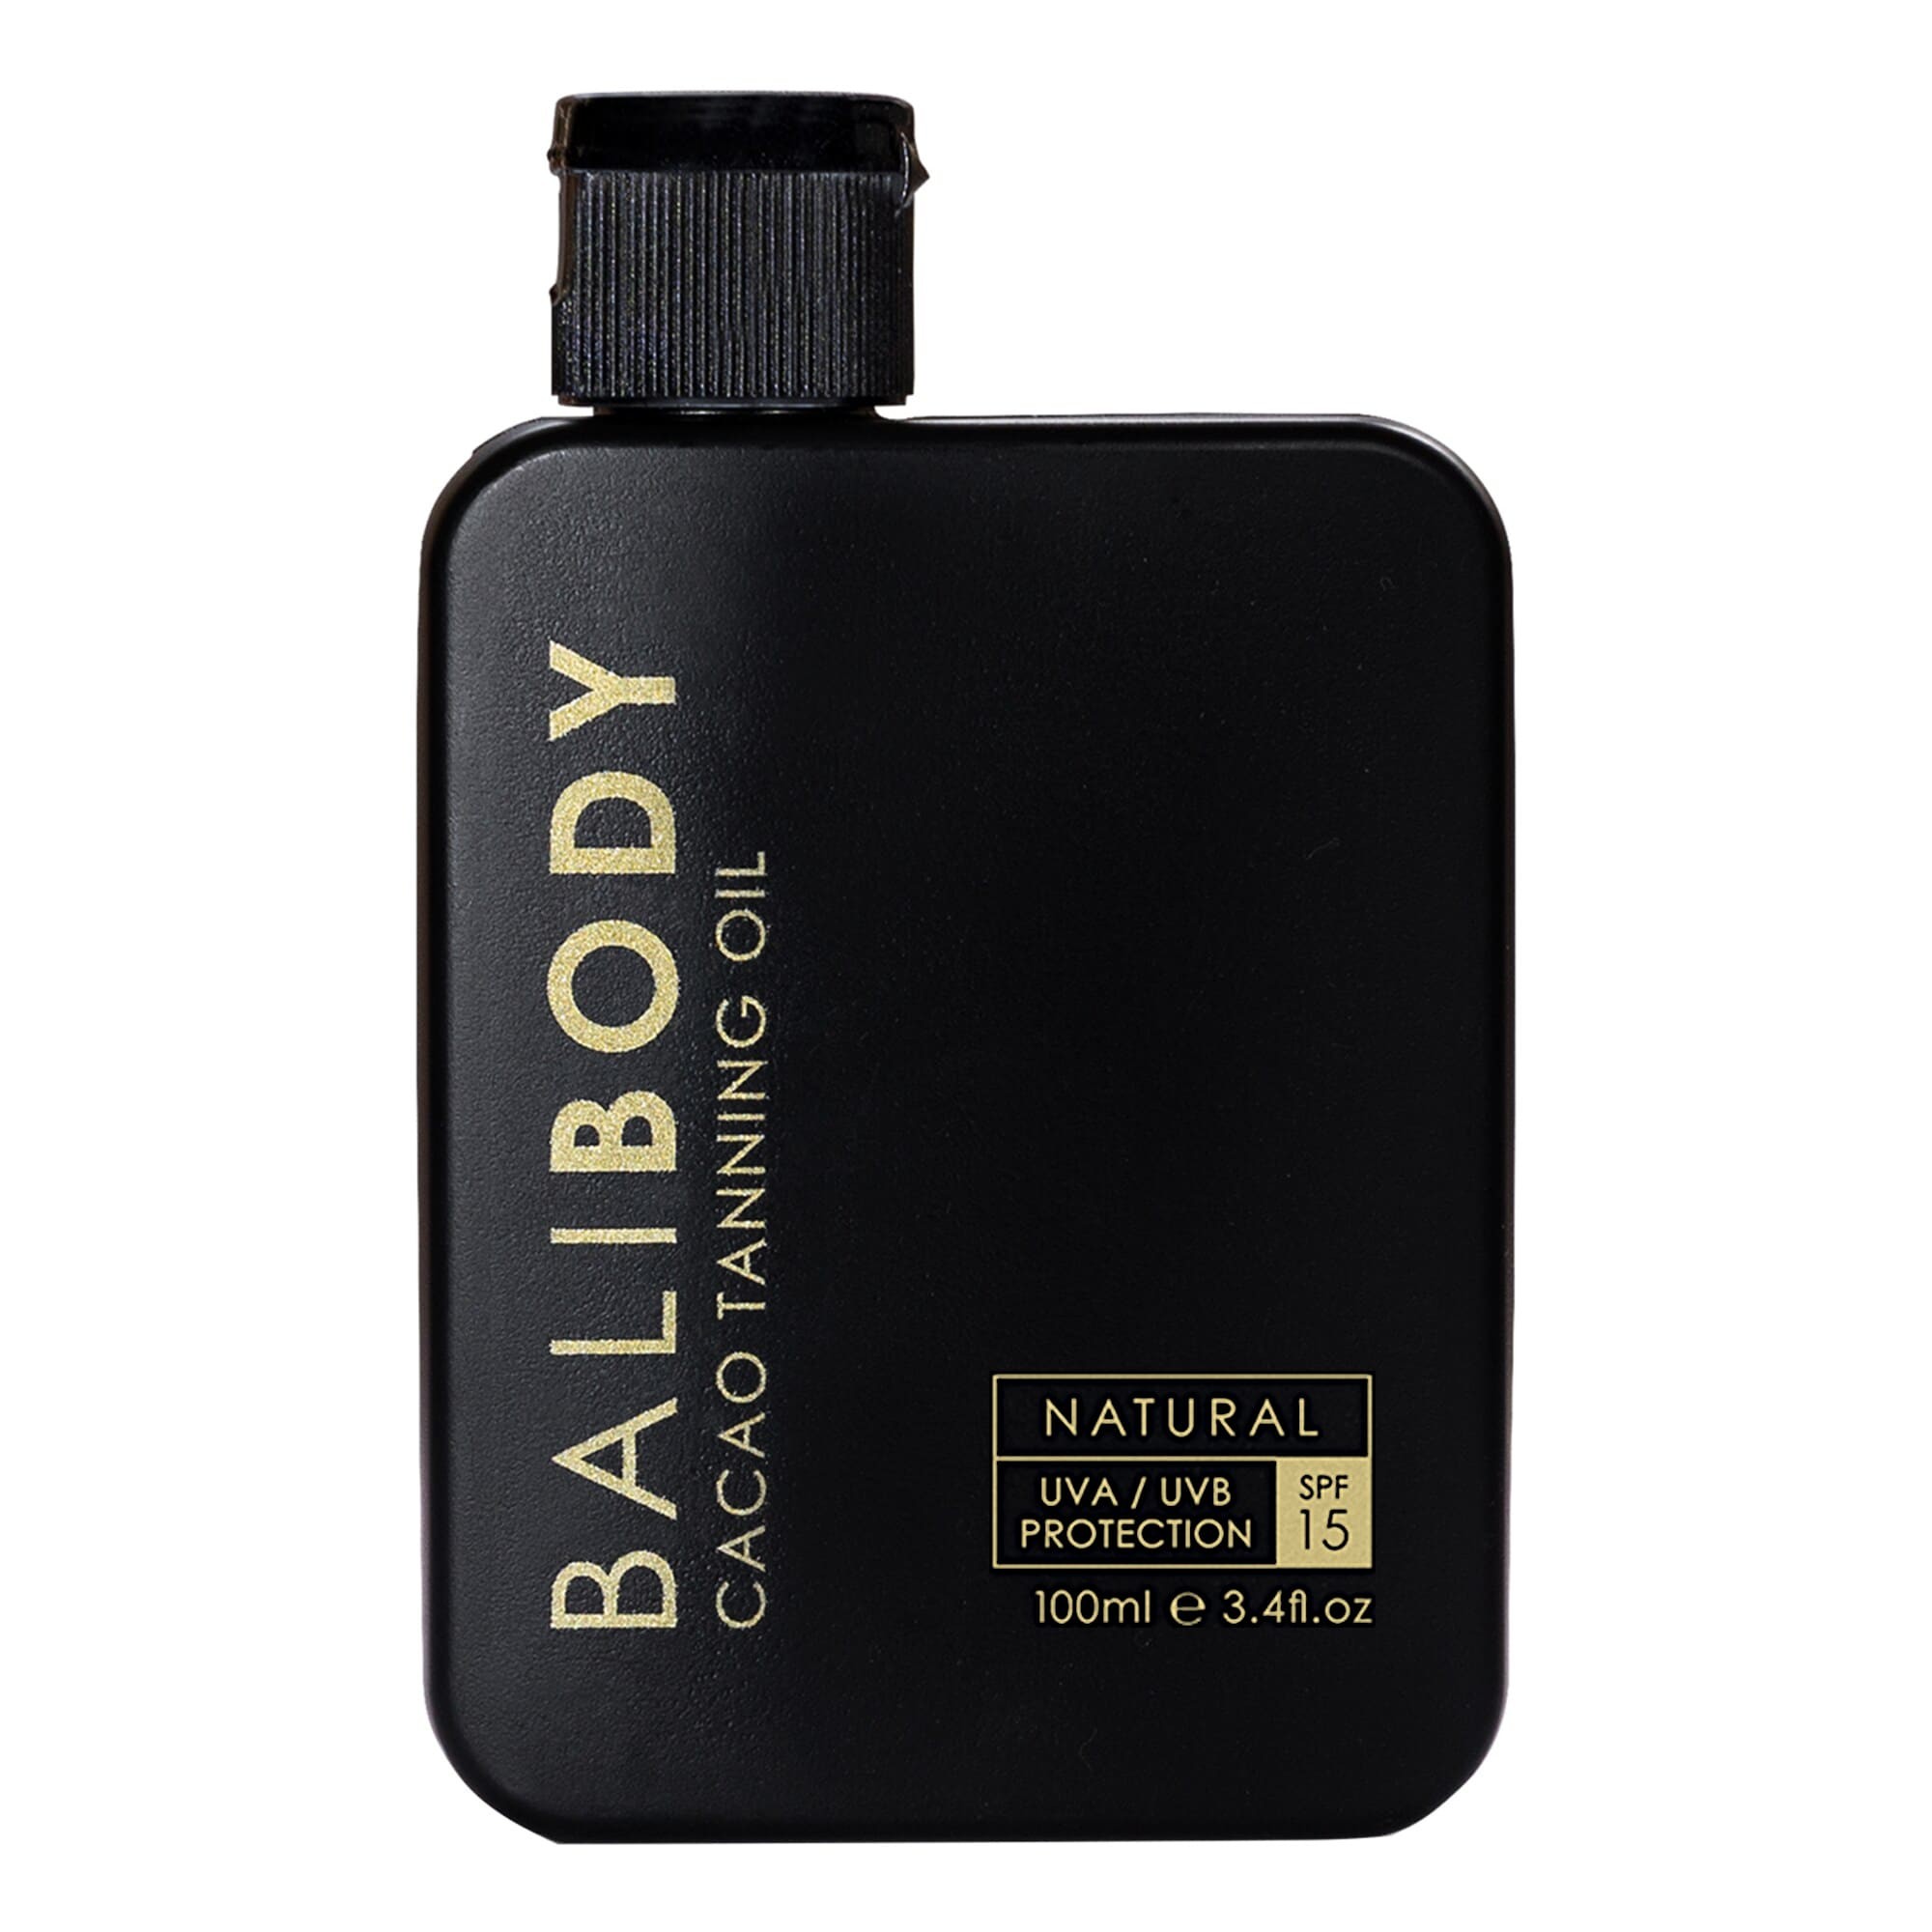 Bali Body Cacao Tanning Oil SPF 15